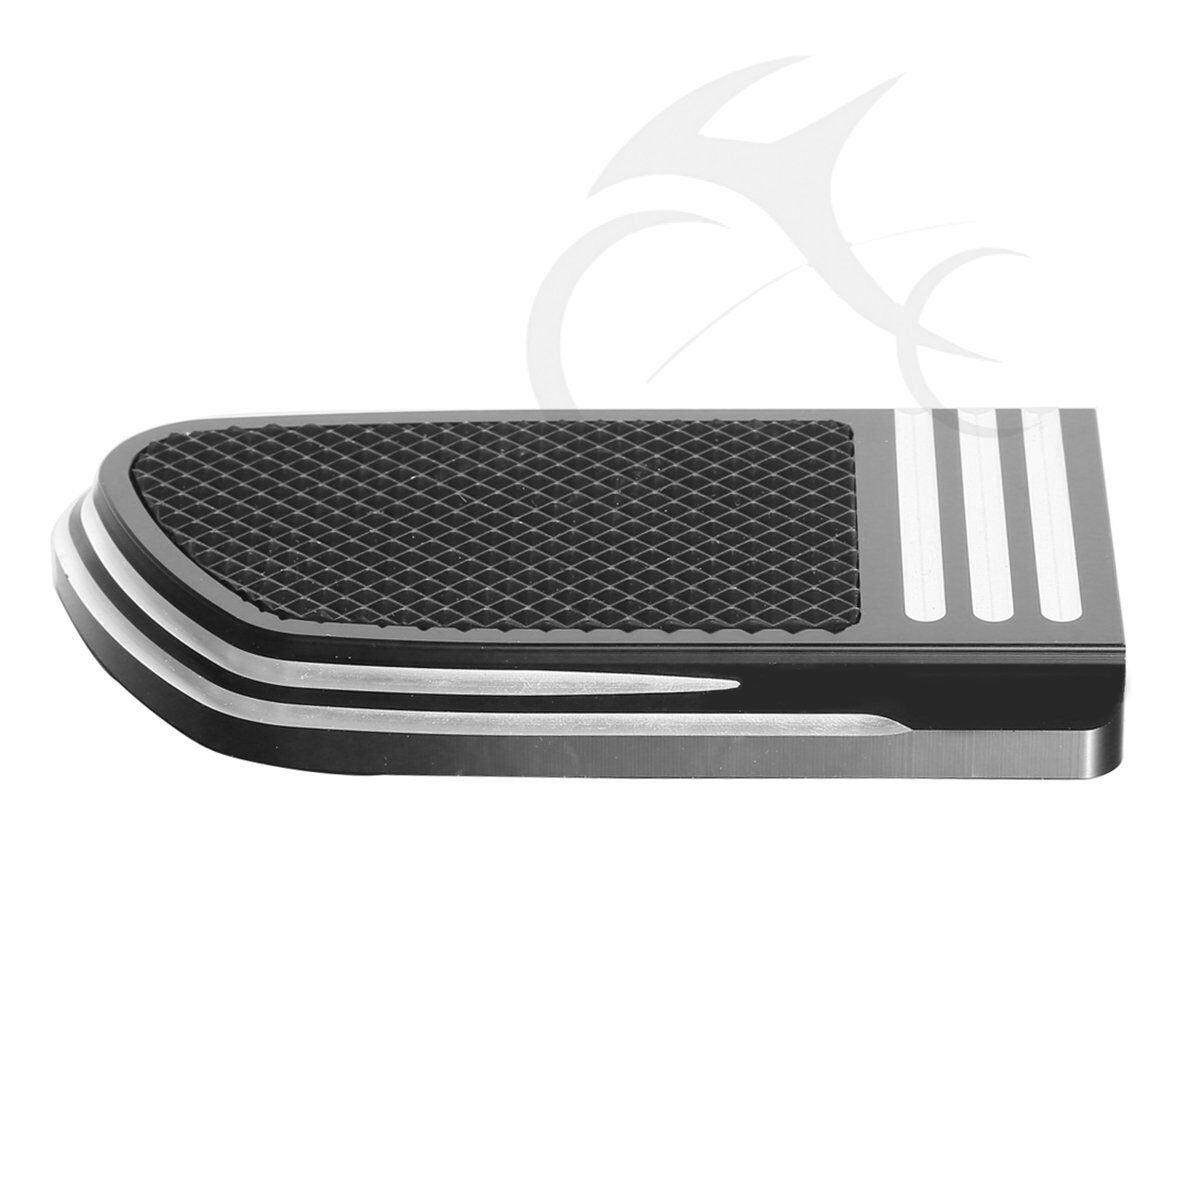 Brake Pedal Pad Fit For Harley Electra Glide FLHT Heritage Softail Defiance - Moto Life Products